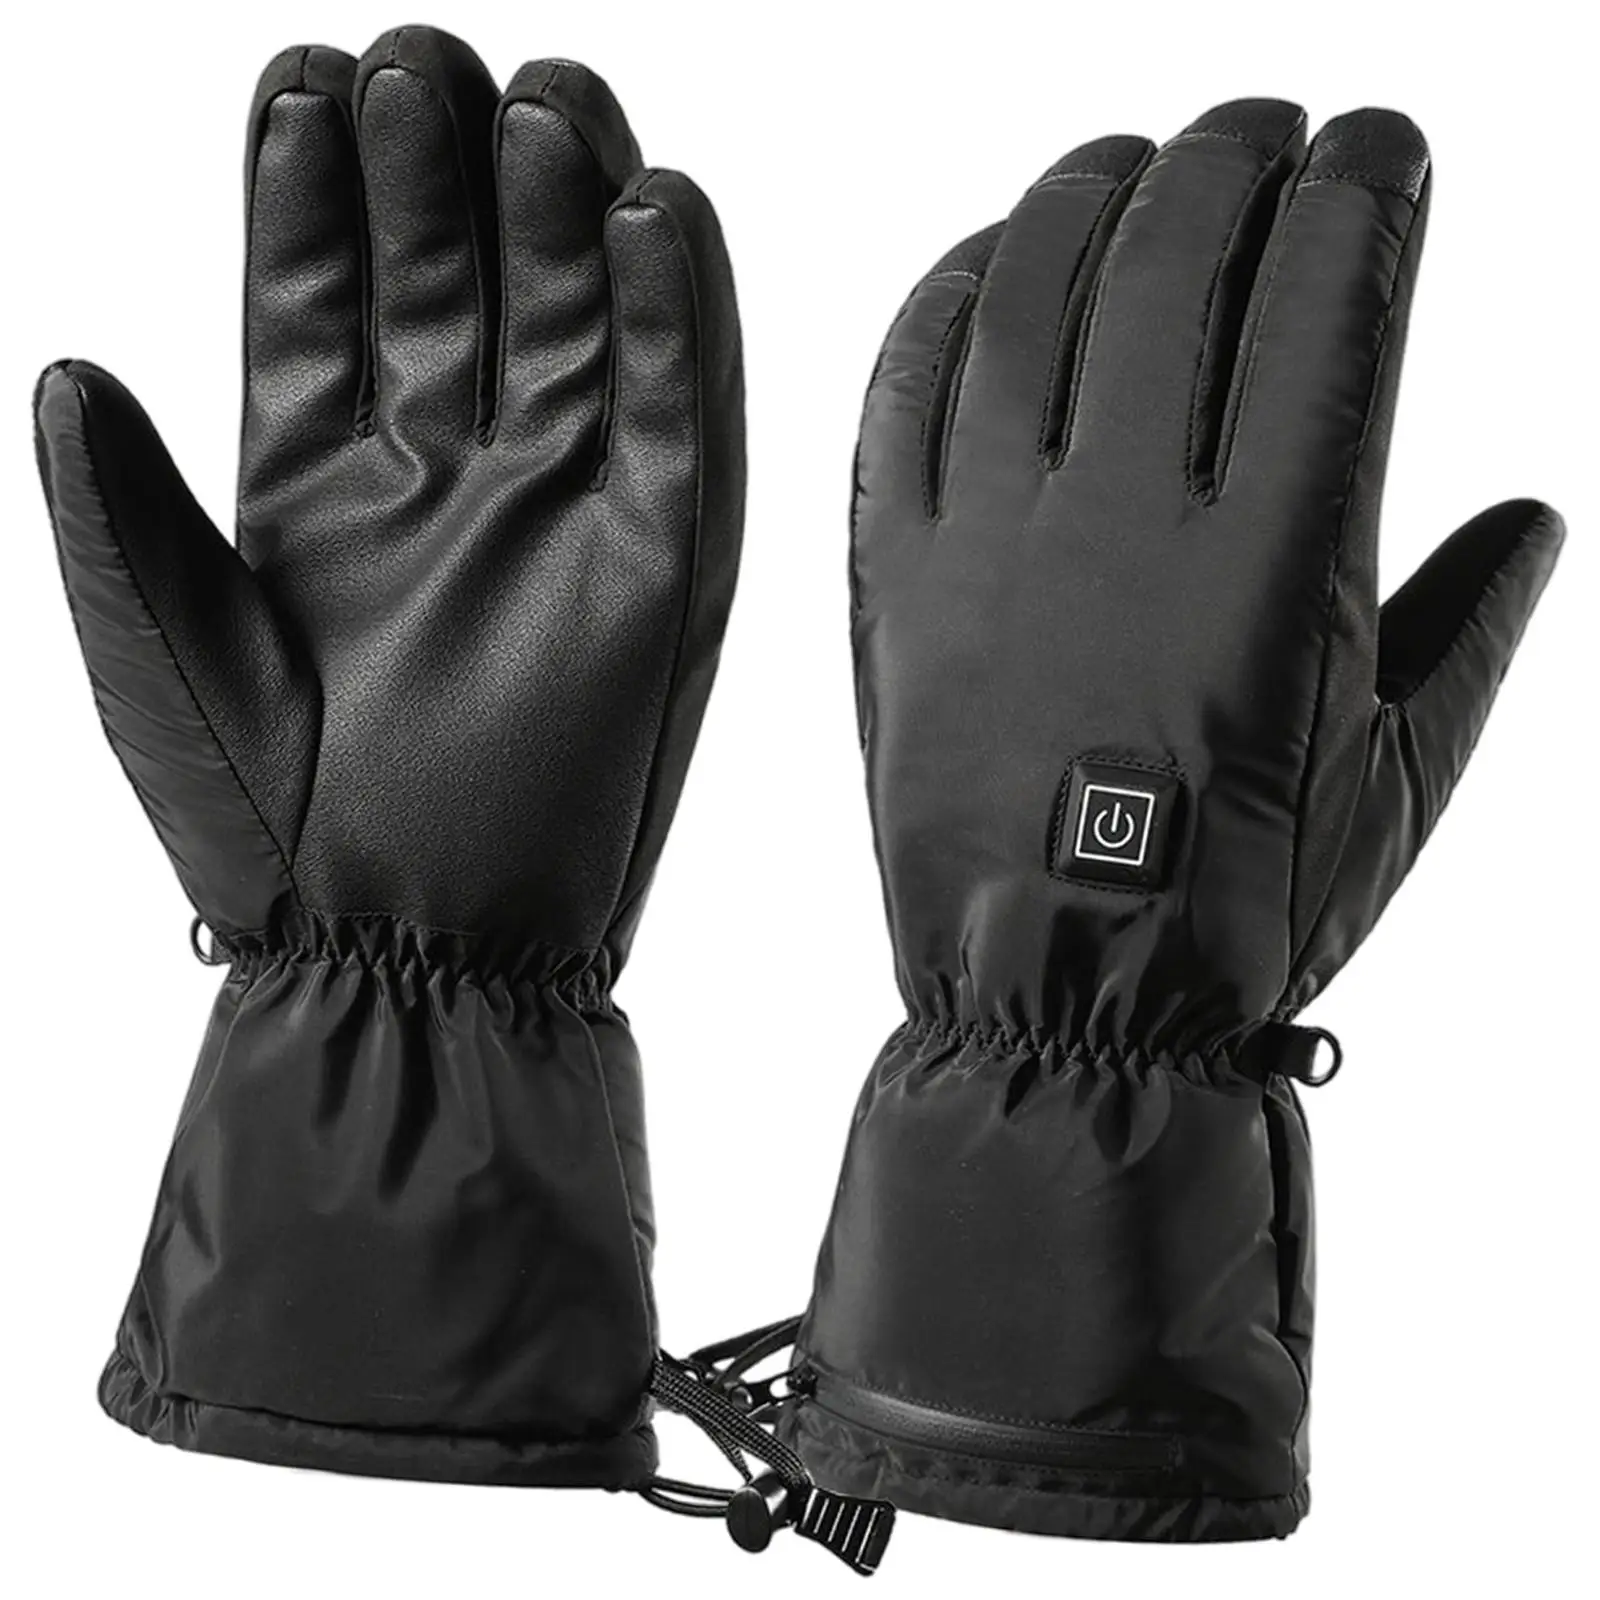 

Heated Gloves 3x AA Battery Electric Men Women Hand Warmers for Hiking Weather 3 Temperature Motorcycle Riding Black